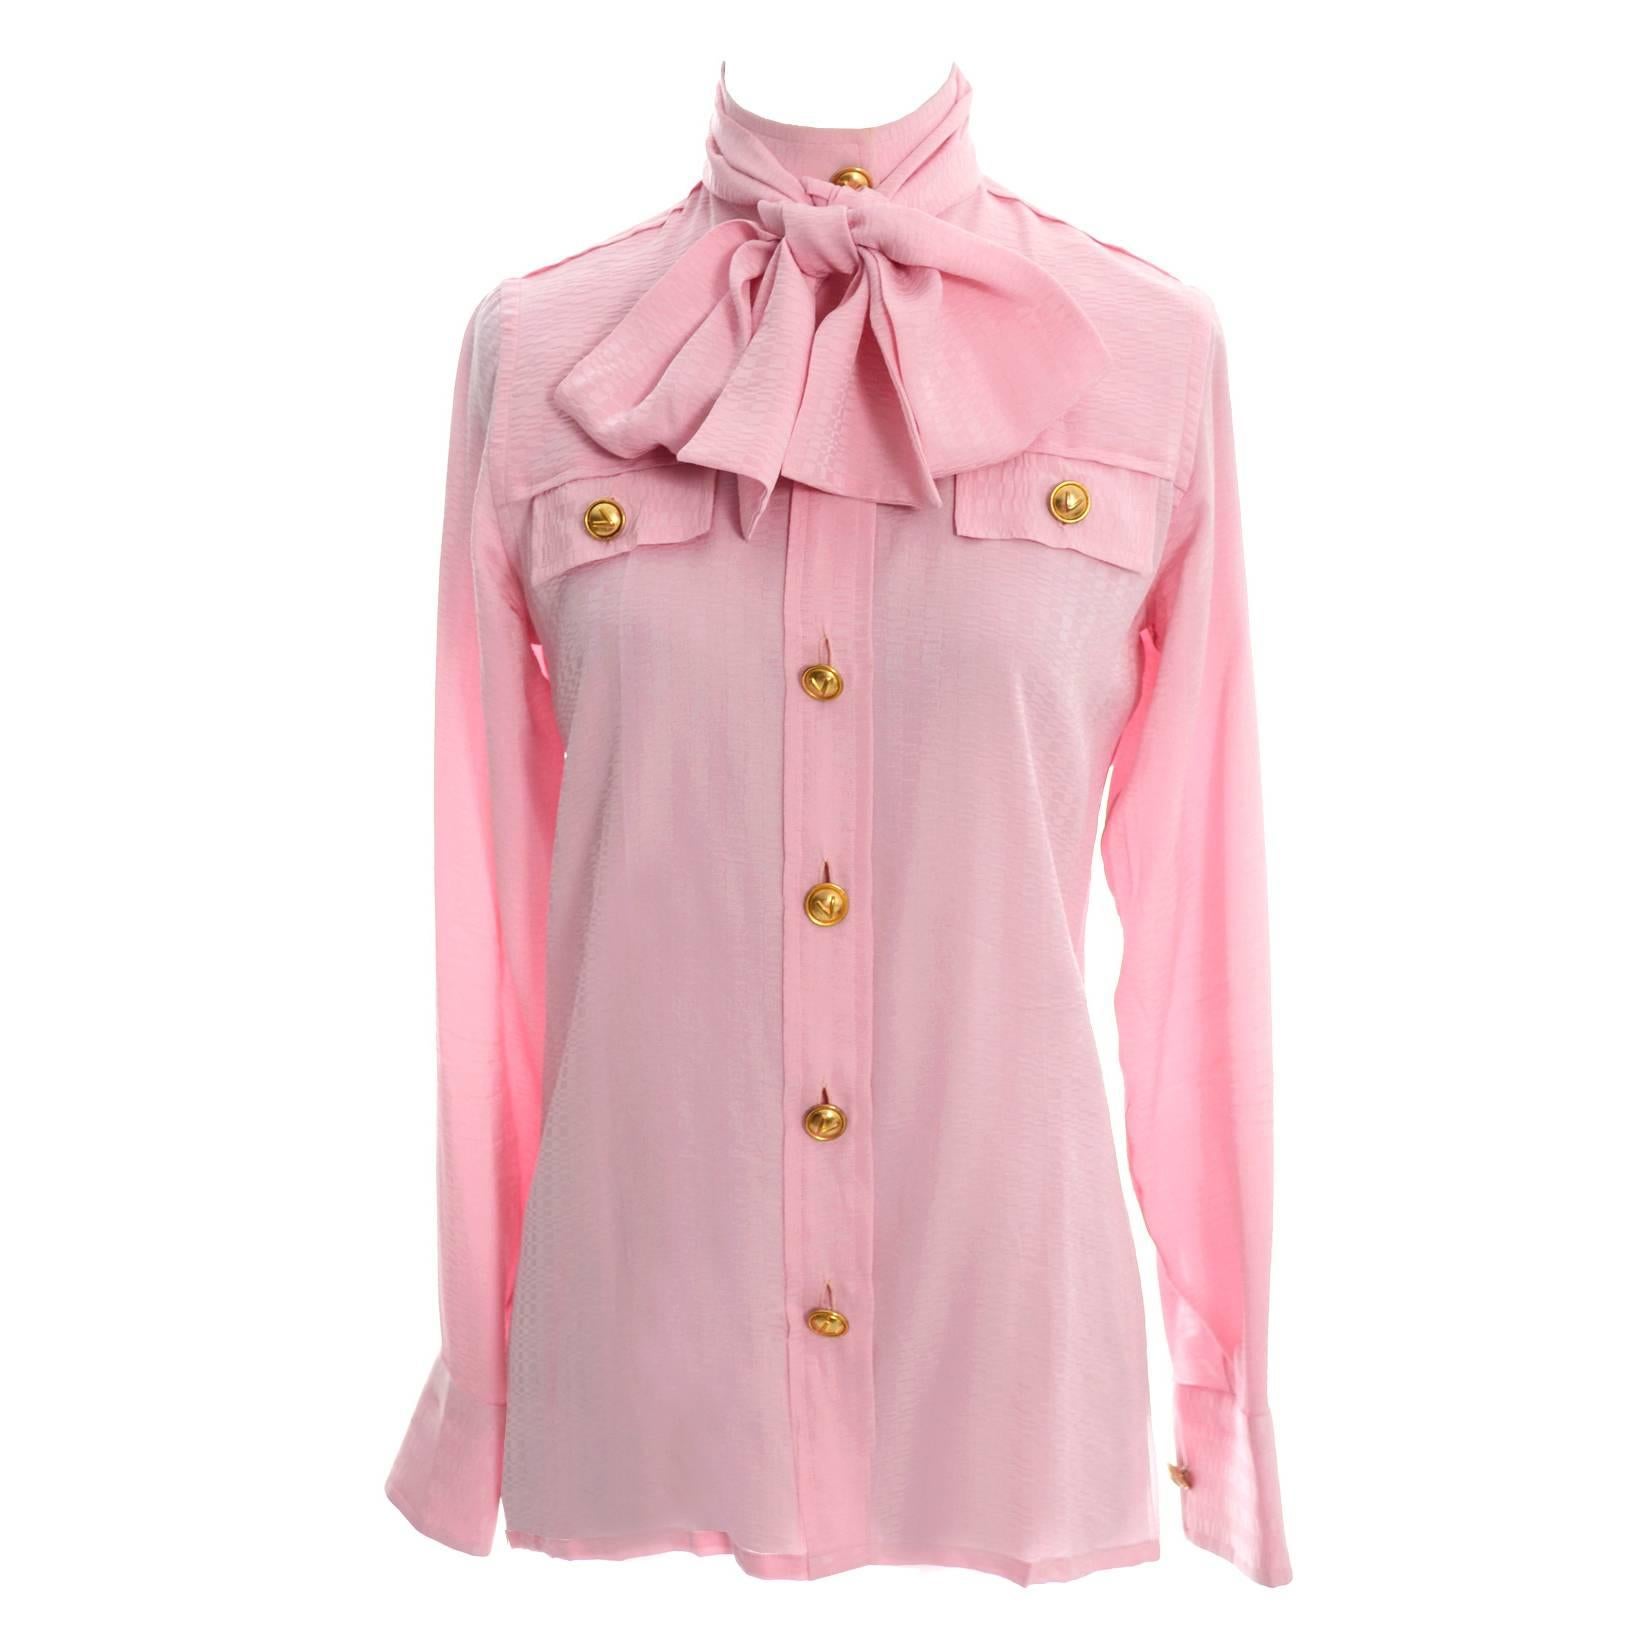 Rare 70s Valentino Pink Silk Bow Blouse V Logo Buttons Older Label Early 1970s